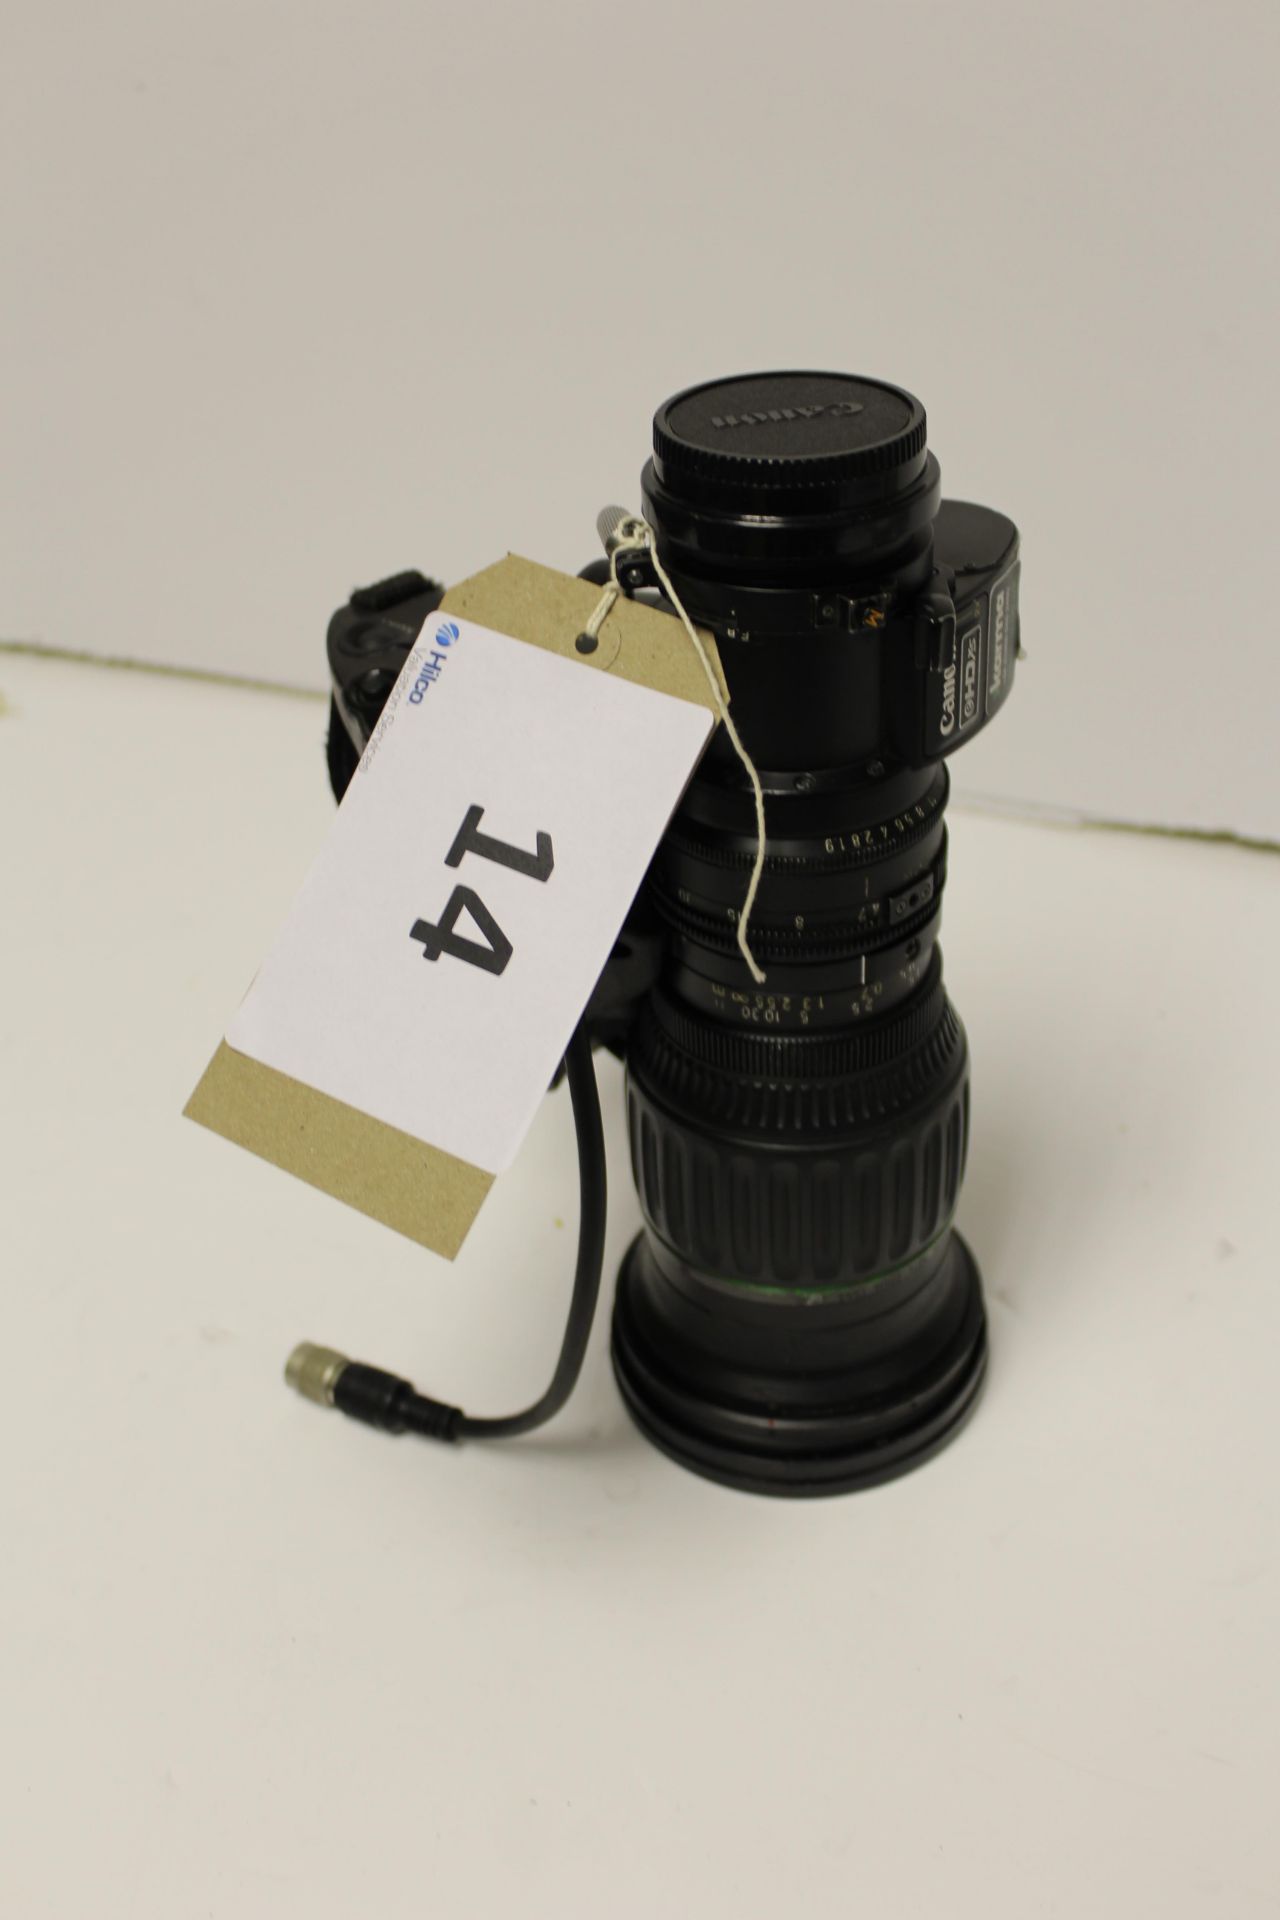 Canon HJ11 EX4.7BIRSE Broadcast Zoom Lens S/N 00716919 with Canon Zoom Demand and Flight Case